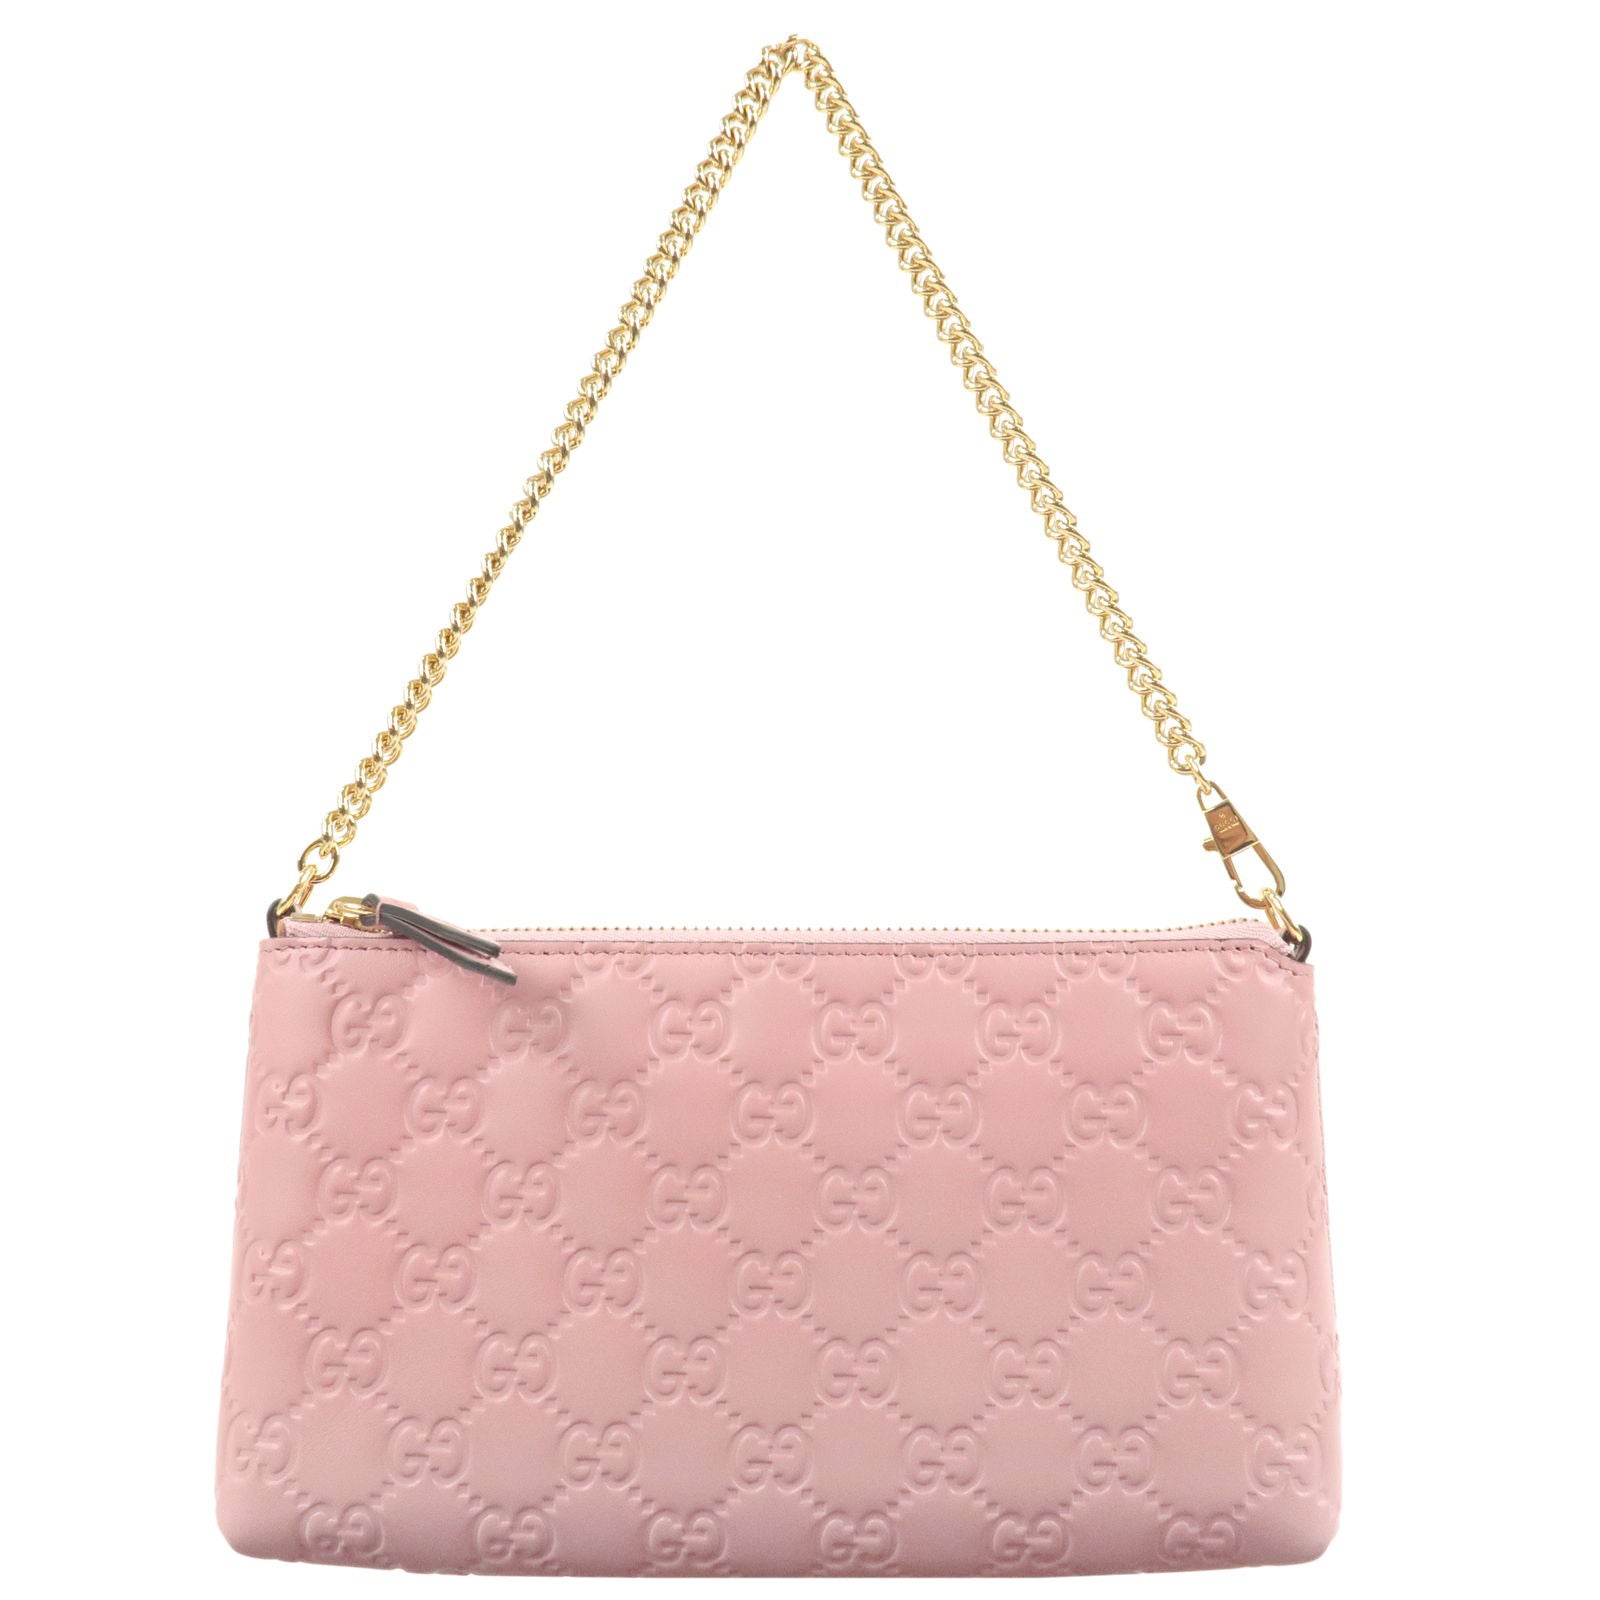 GUCCI-Guccissima-Leather-Wristlet-Chain-Wallet-Pink-428449